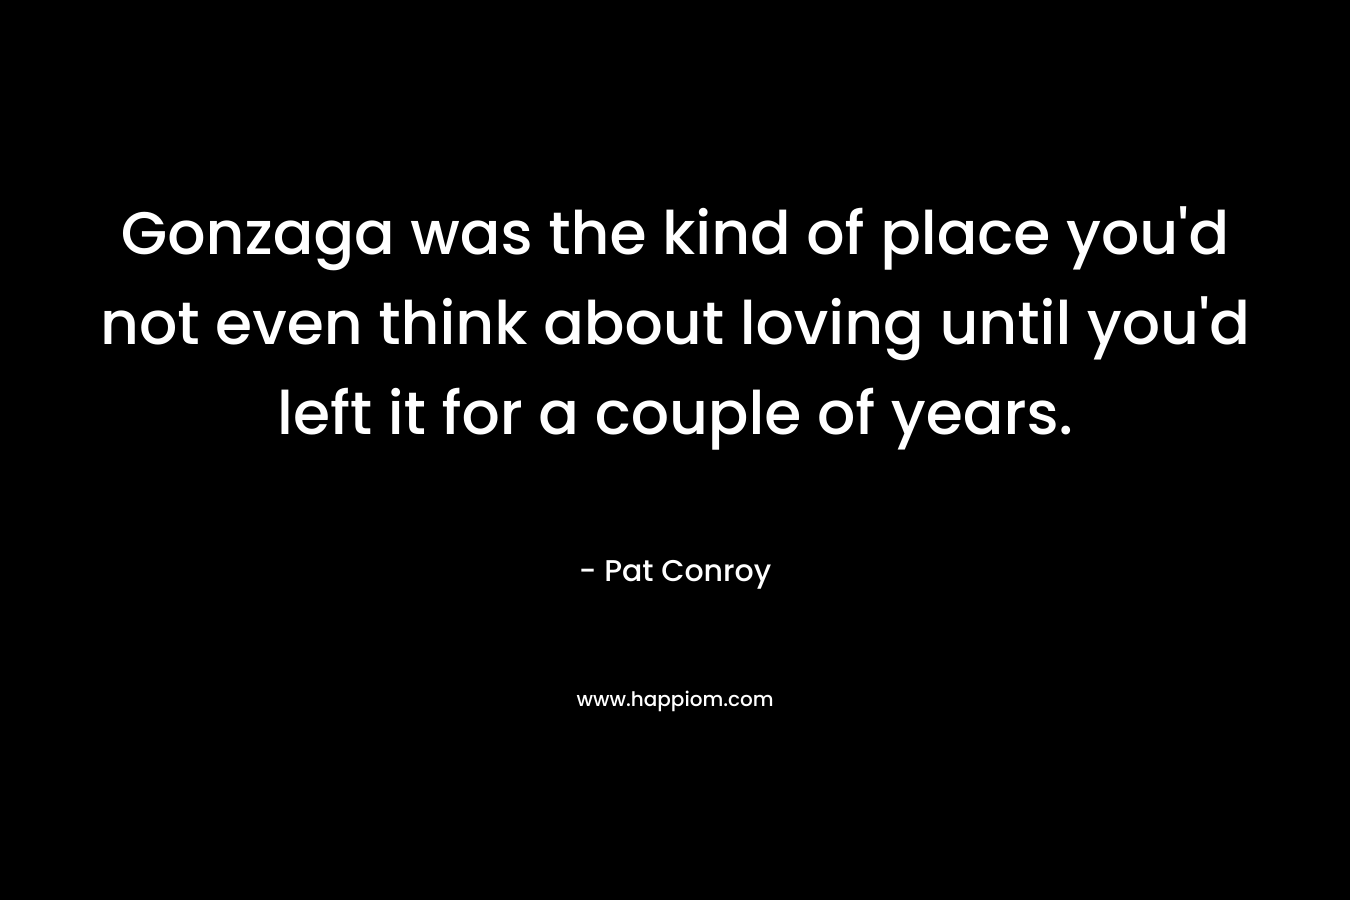 Gonzaga was the kind of place you'd not even think about loving until you'd left it for a couple of years.